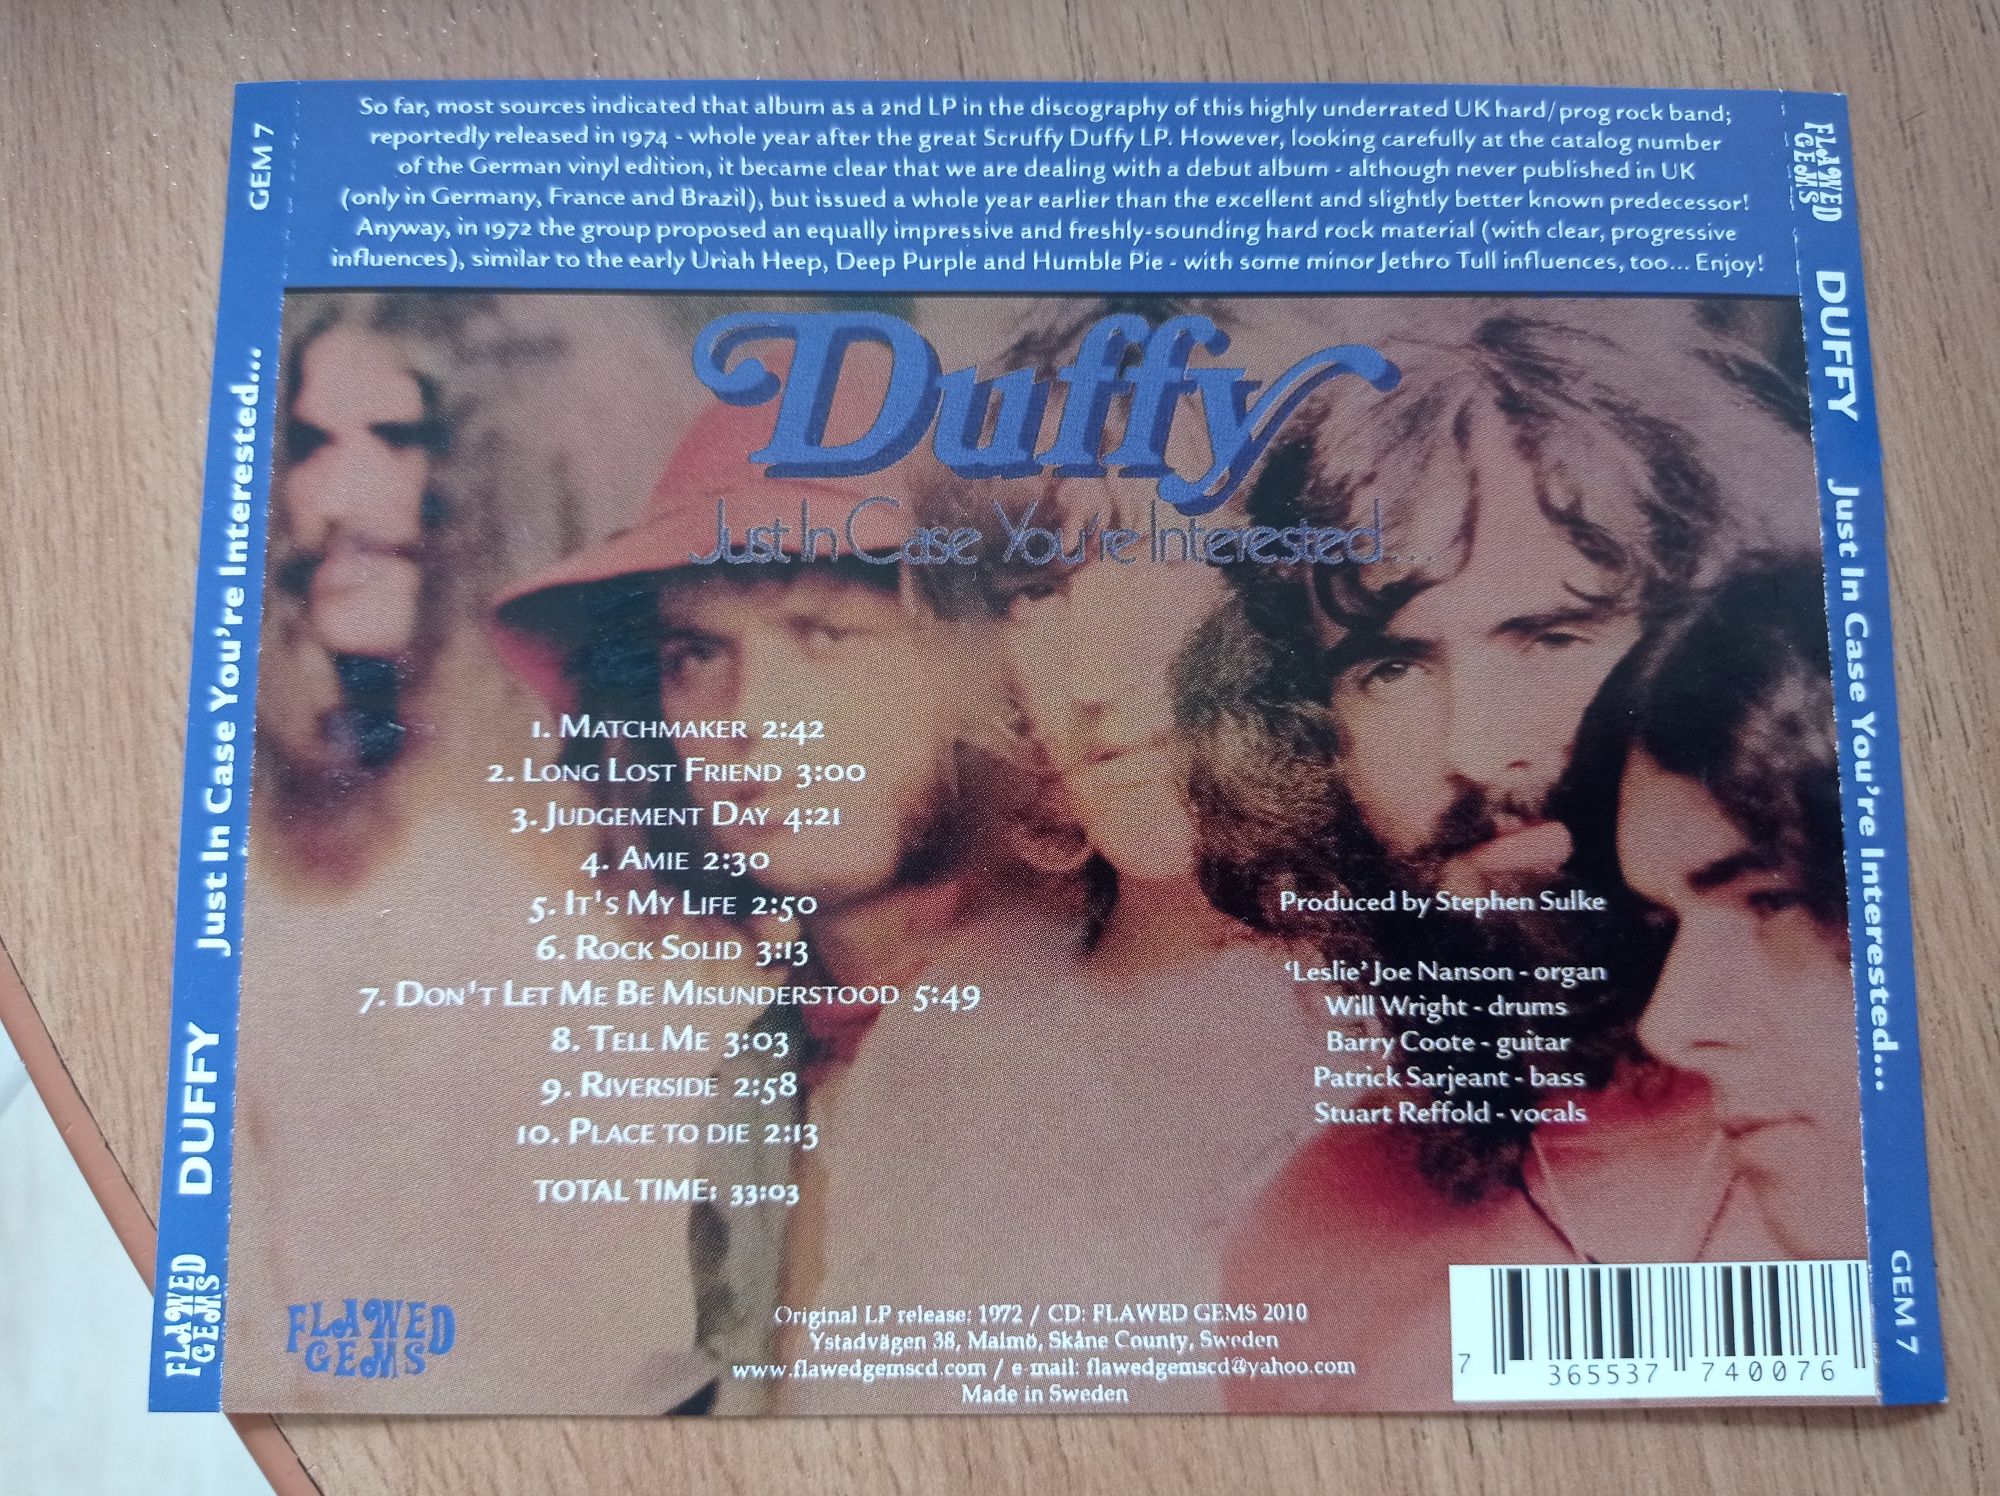 Duffy - Just in case You're interested